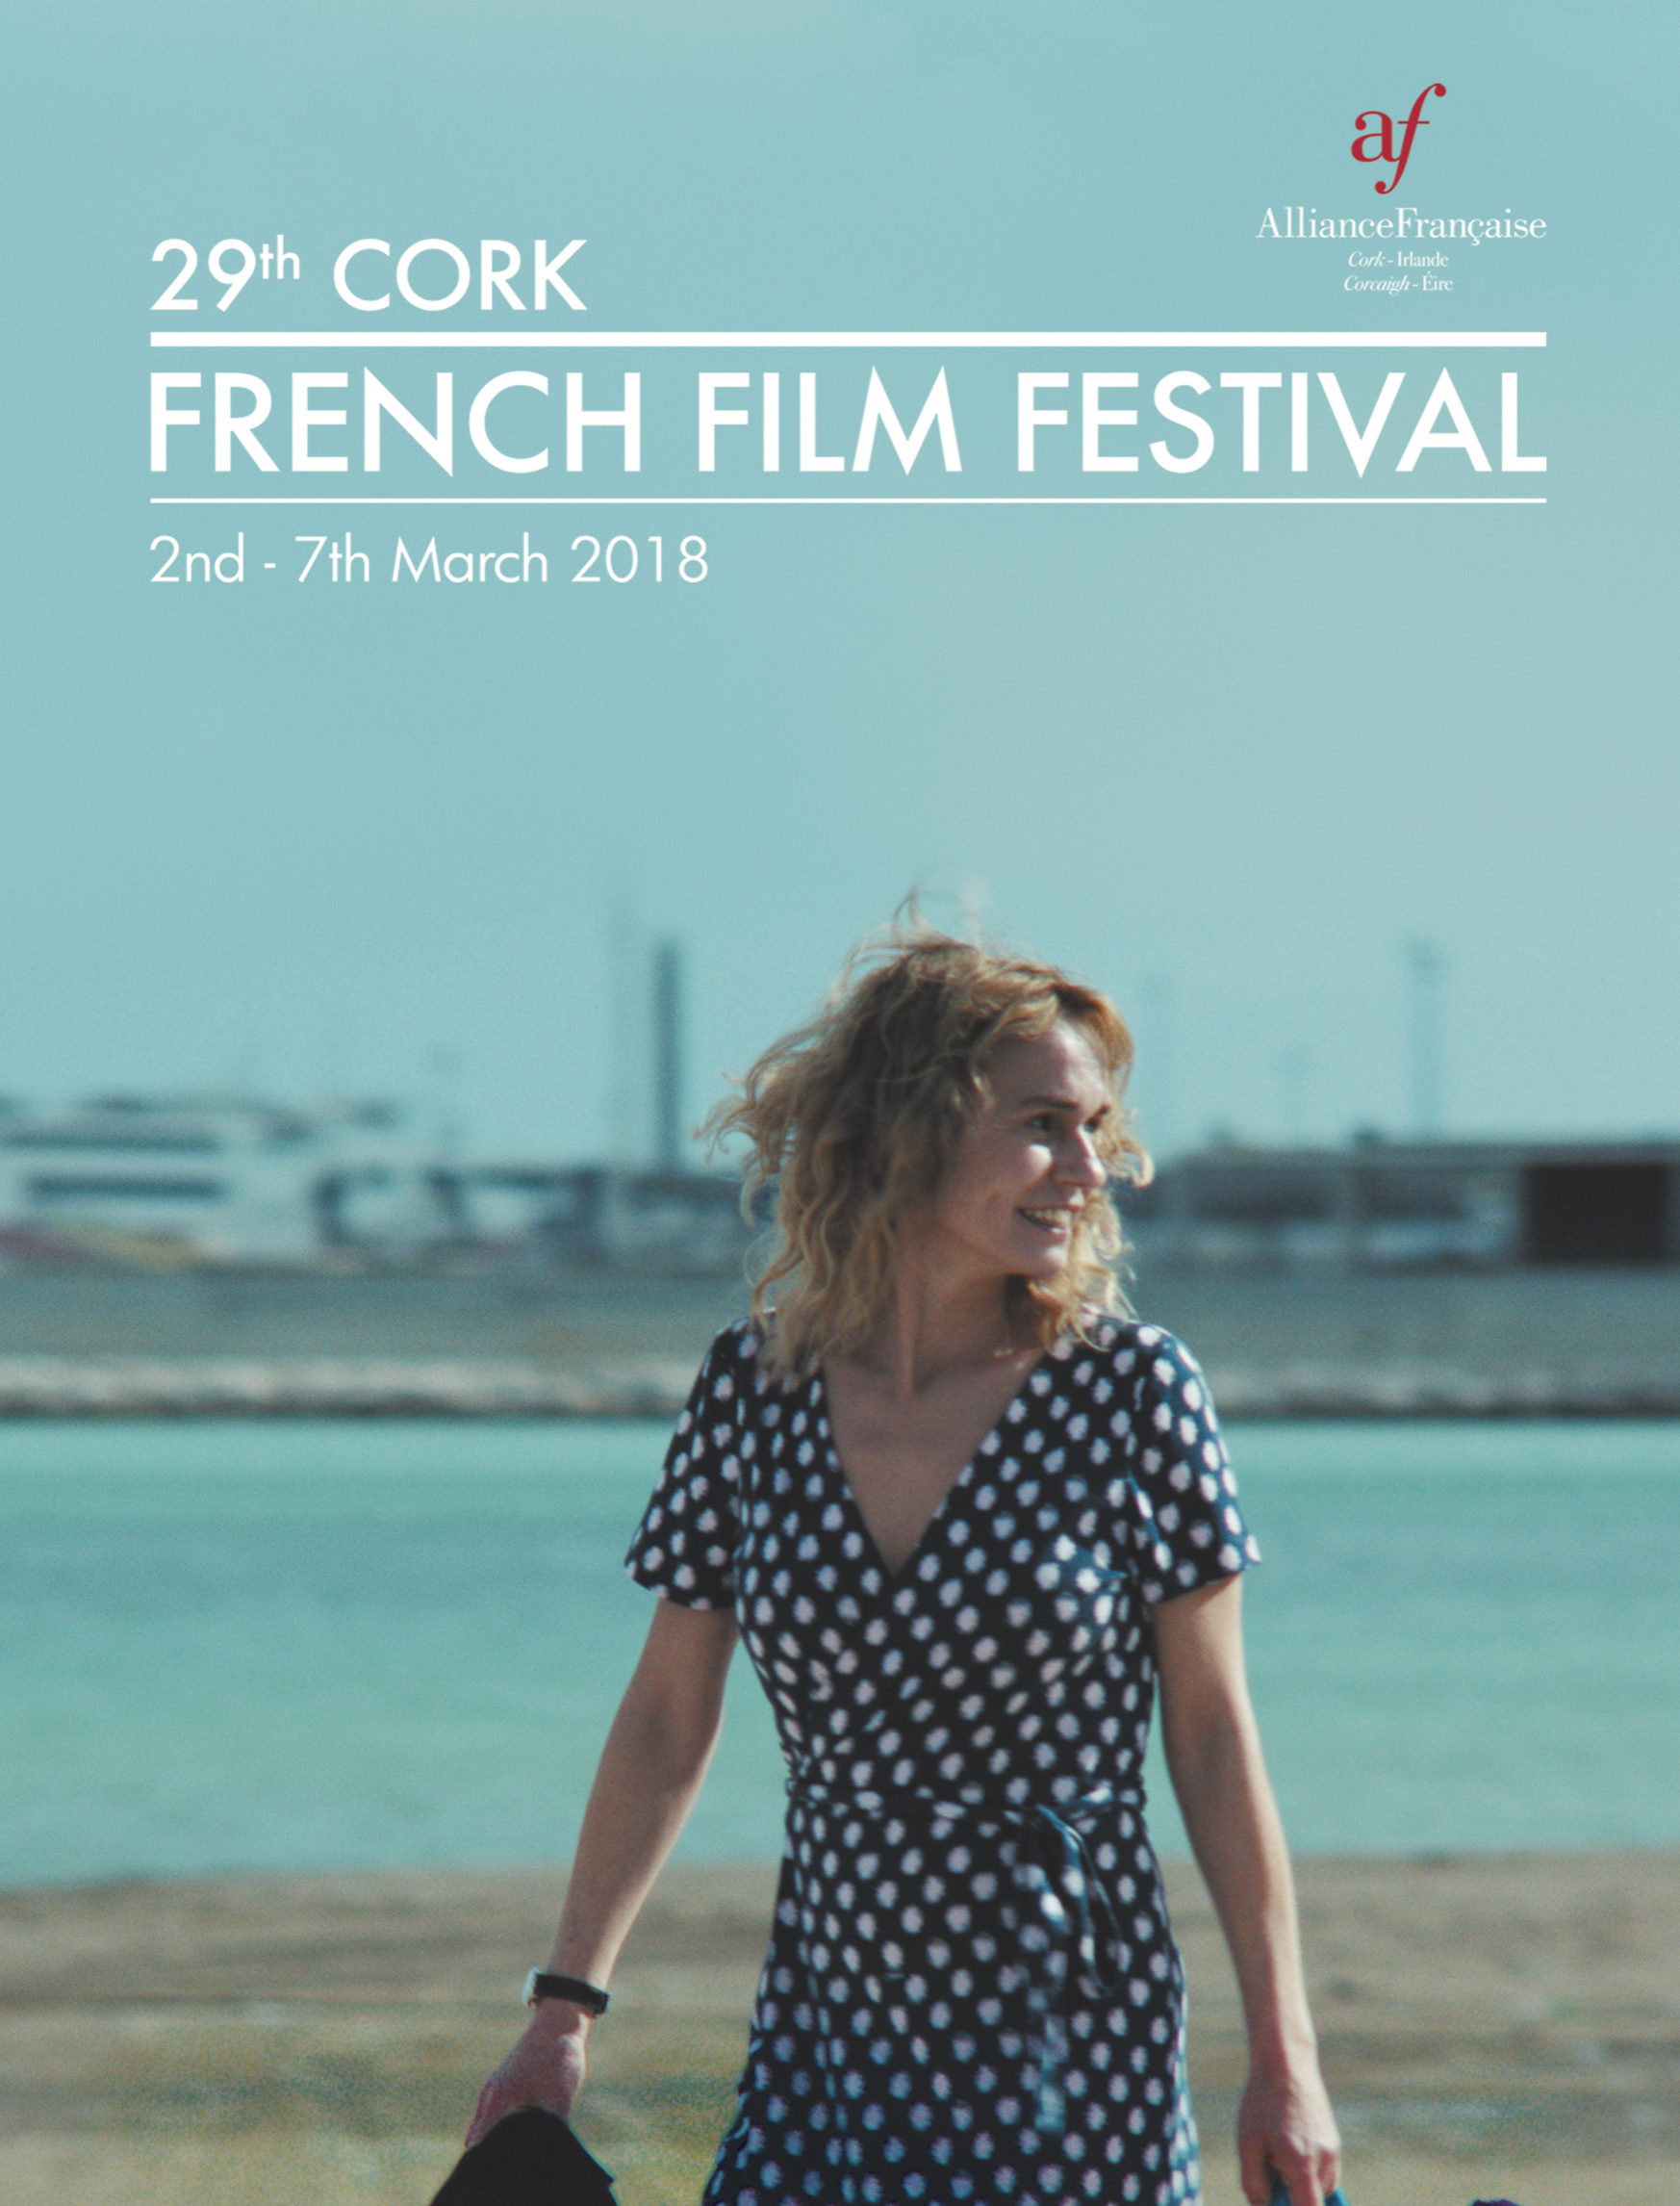 French Film Festival Master class
with Gaël Morel